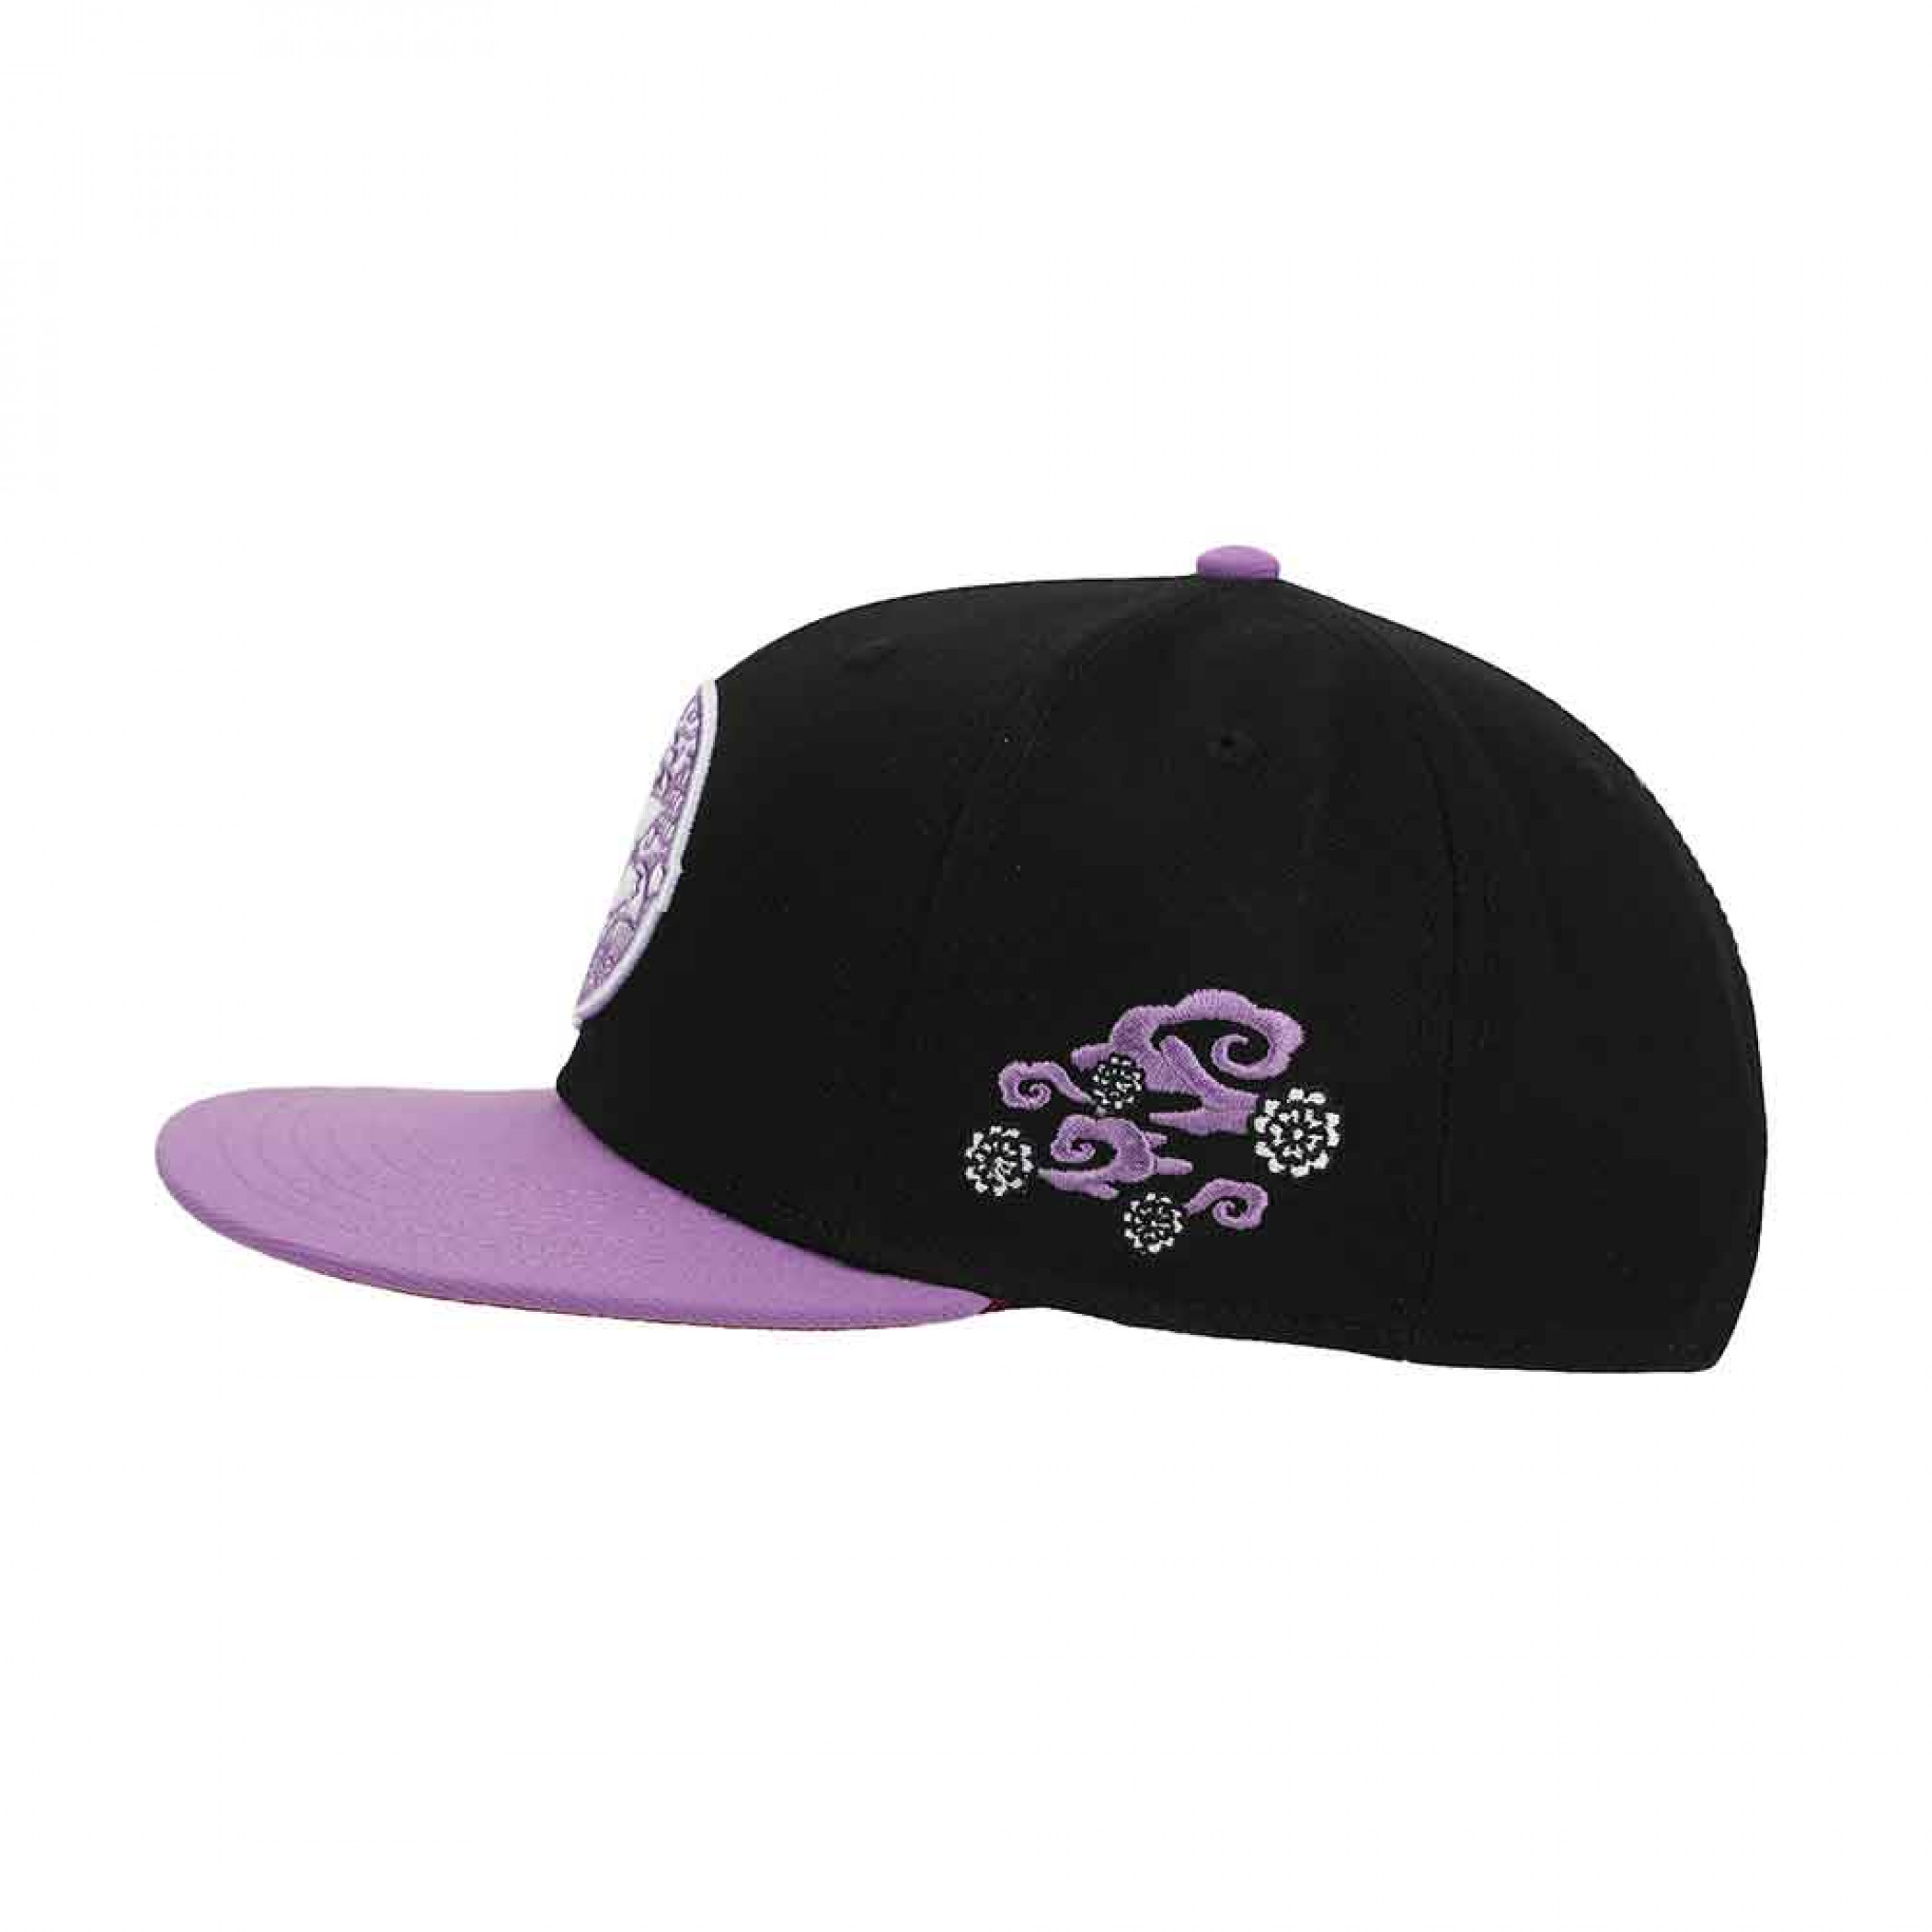 Pokemon Gengar Ghost Type Embroidered Snapback Hat